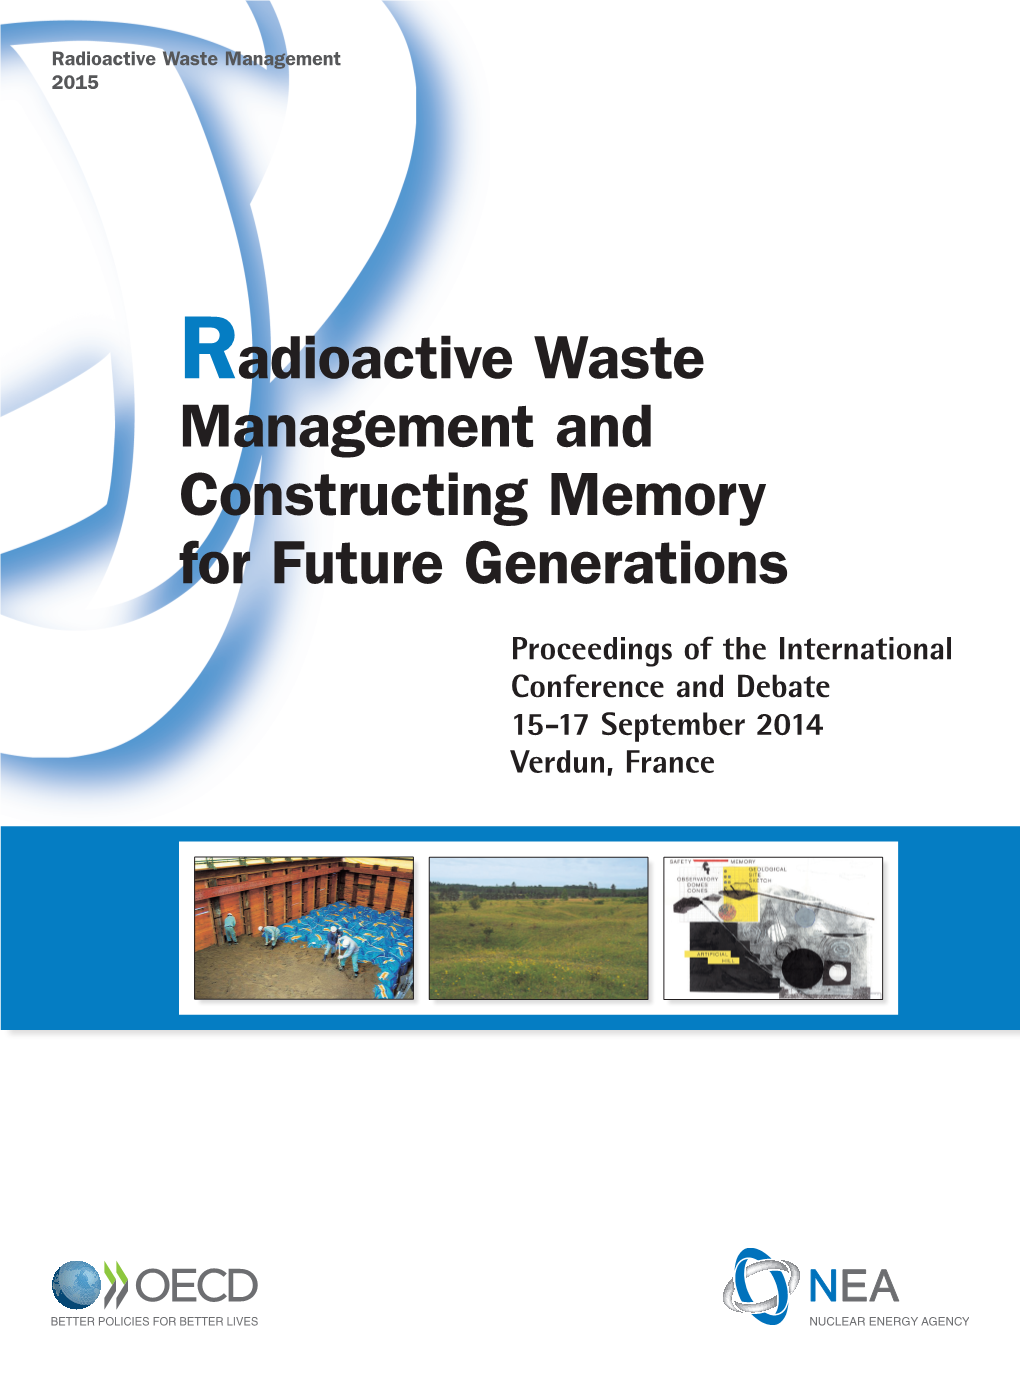 Radioactive Waste Management and Constructing Memory for Future Generations, Proceedings of the International Conference And